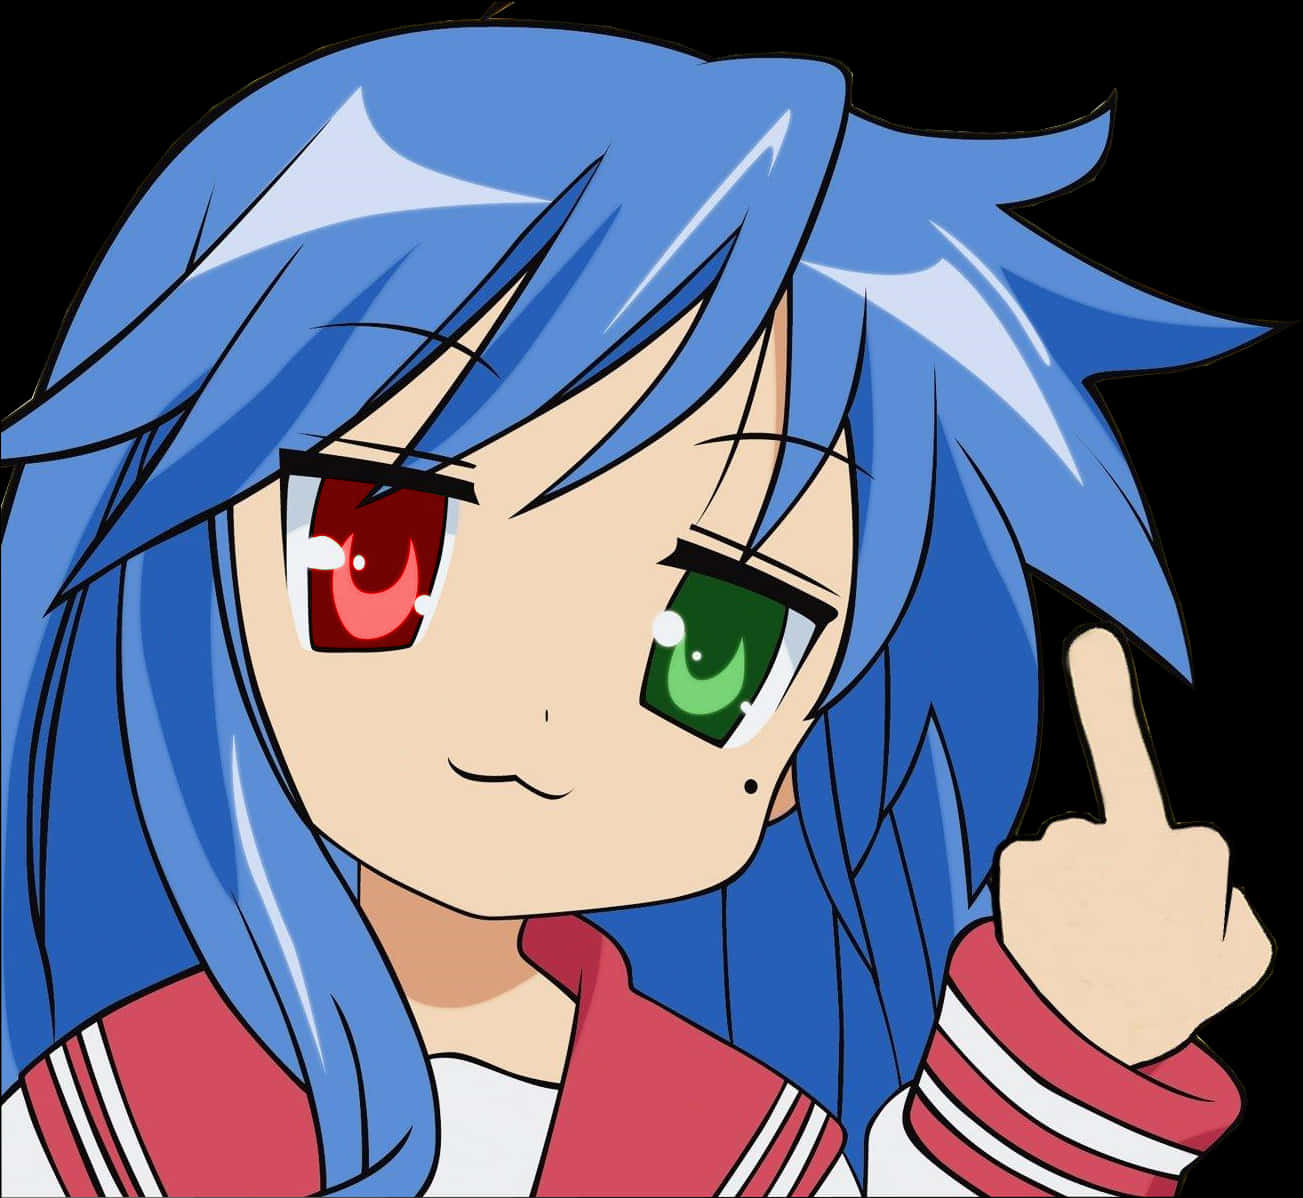 Anime Character Index Finger Raised PNG